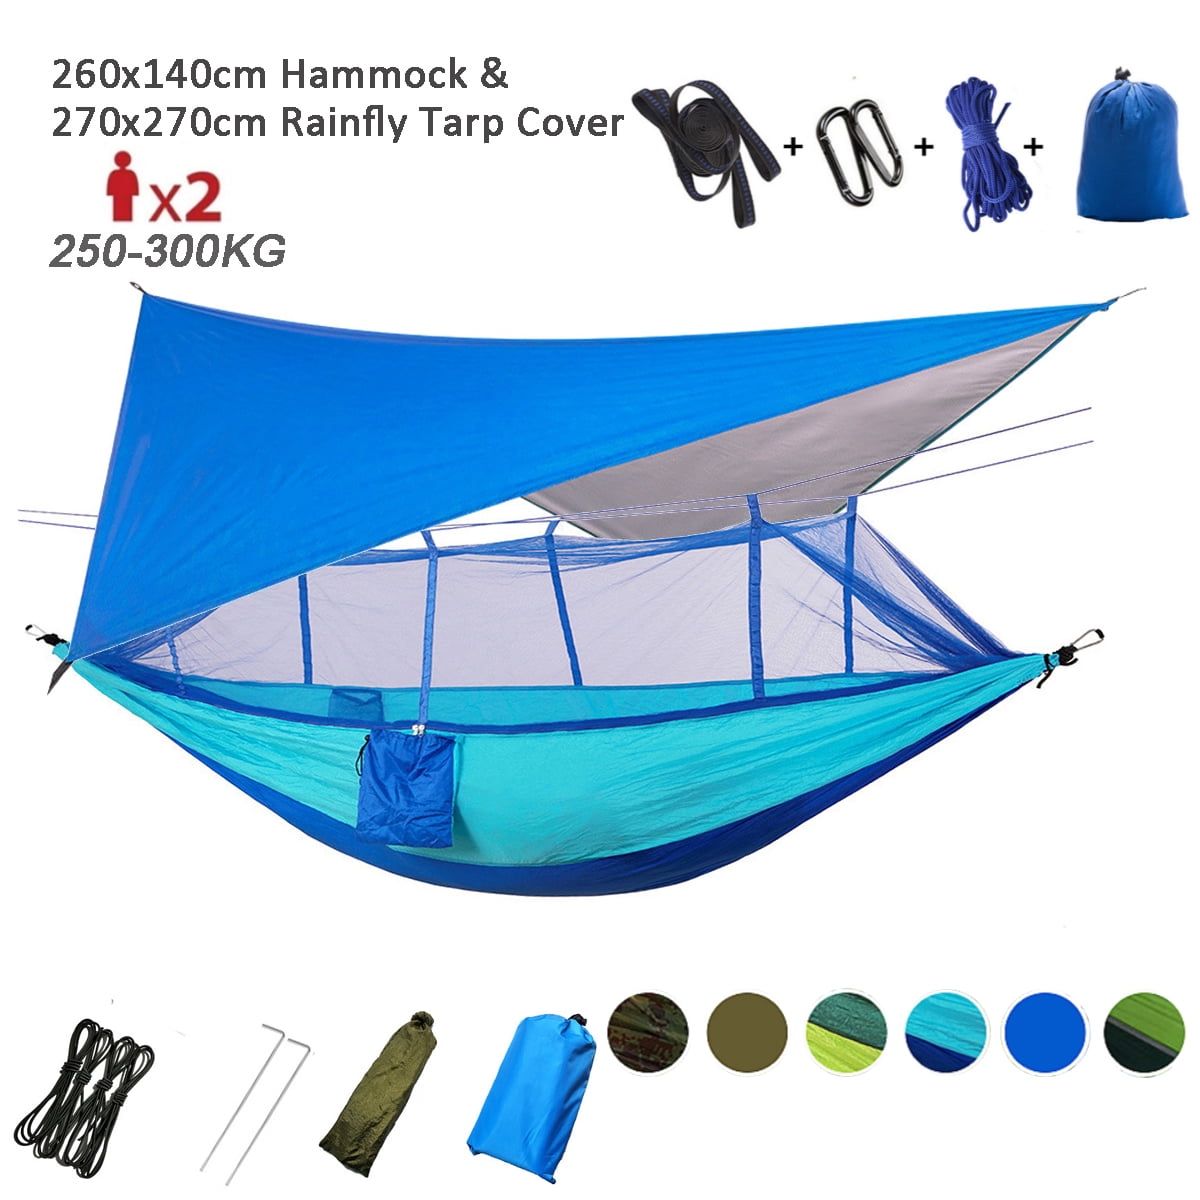 2 Person Outdoor Camping Hammock Bed With Mosquito Nets Rain Fly Tarpaulin